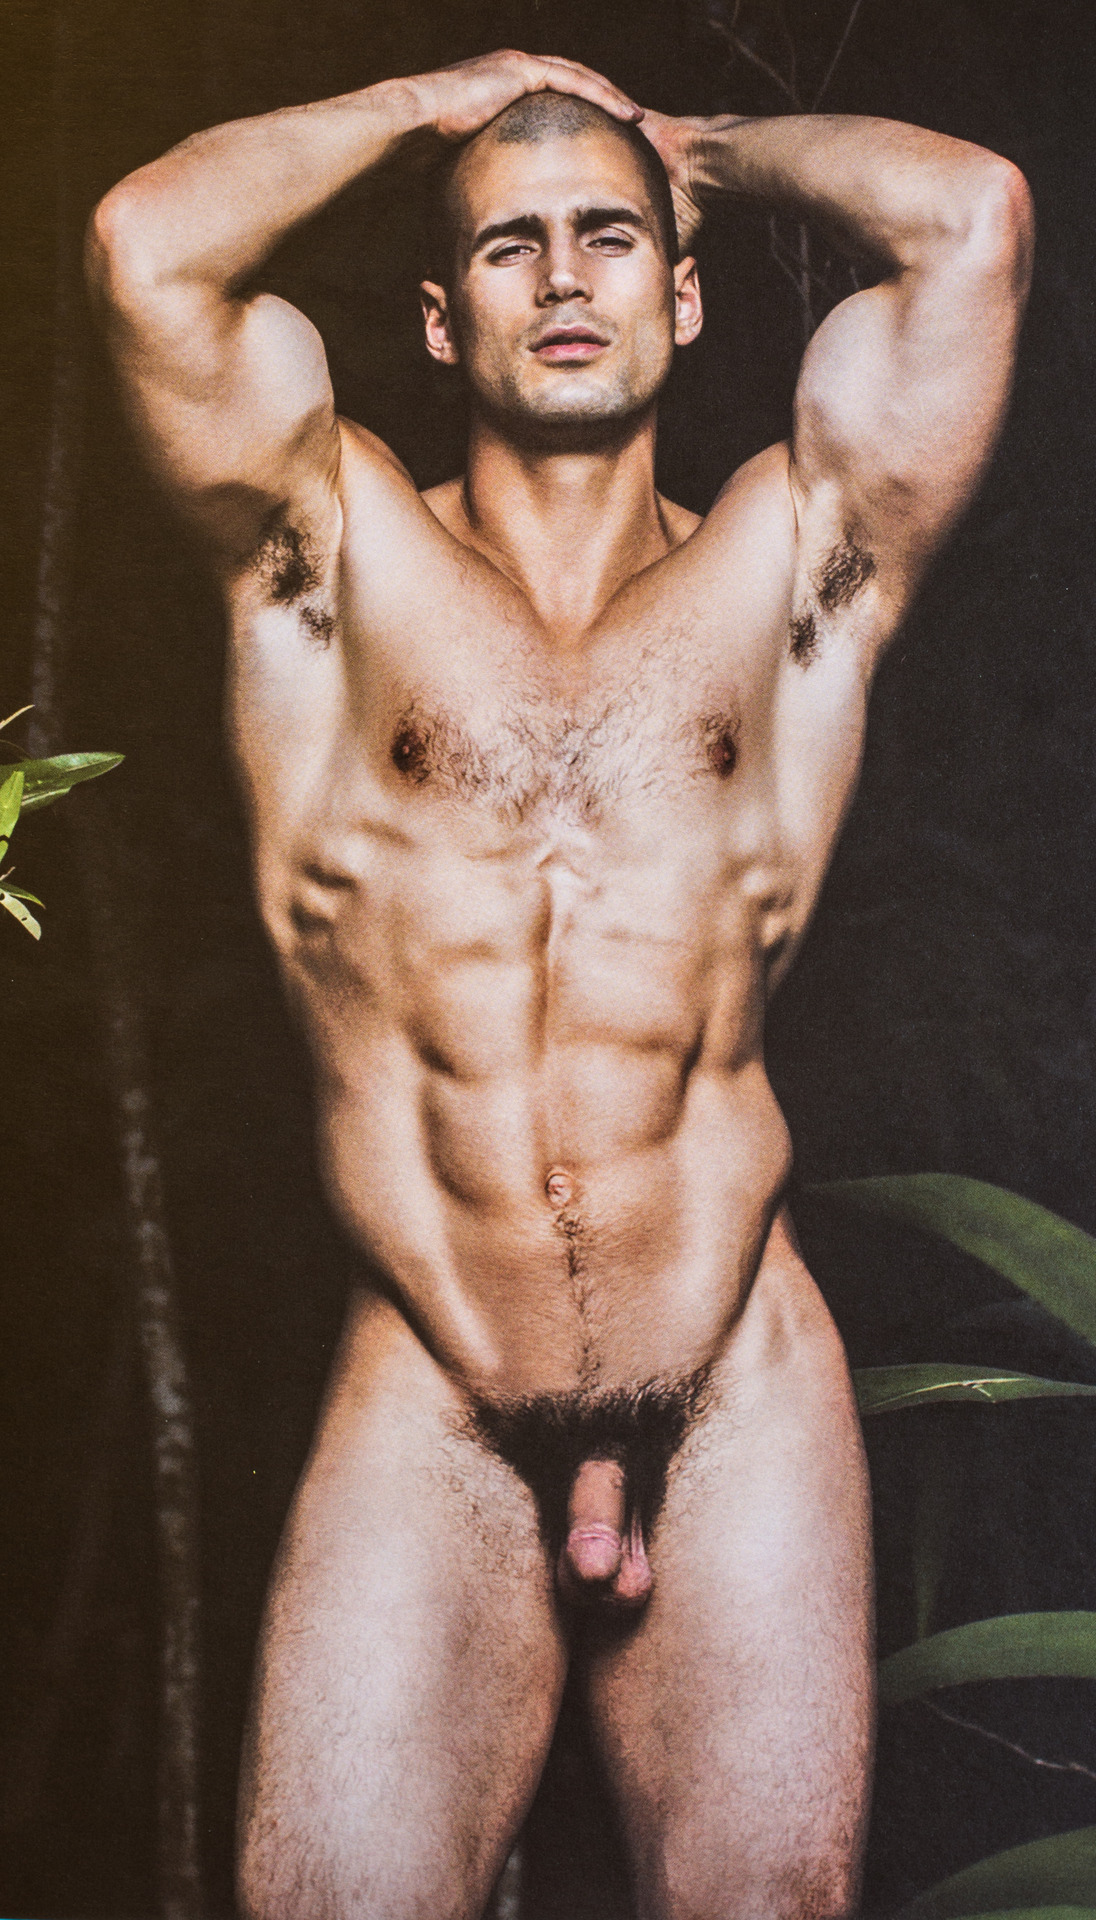 Todd sanfield baseball cap hairy fuck picture